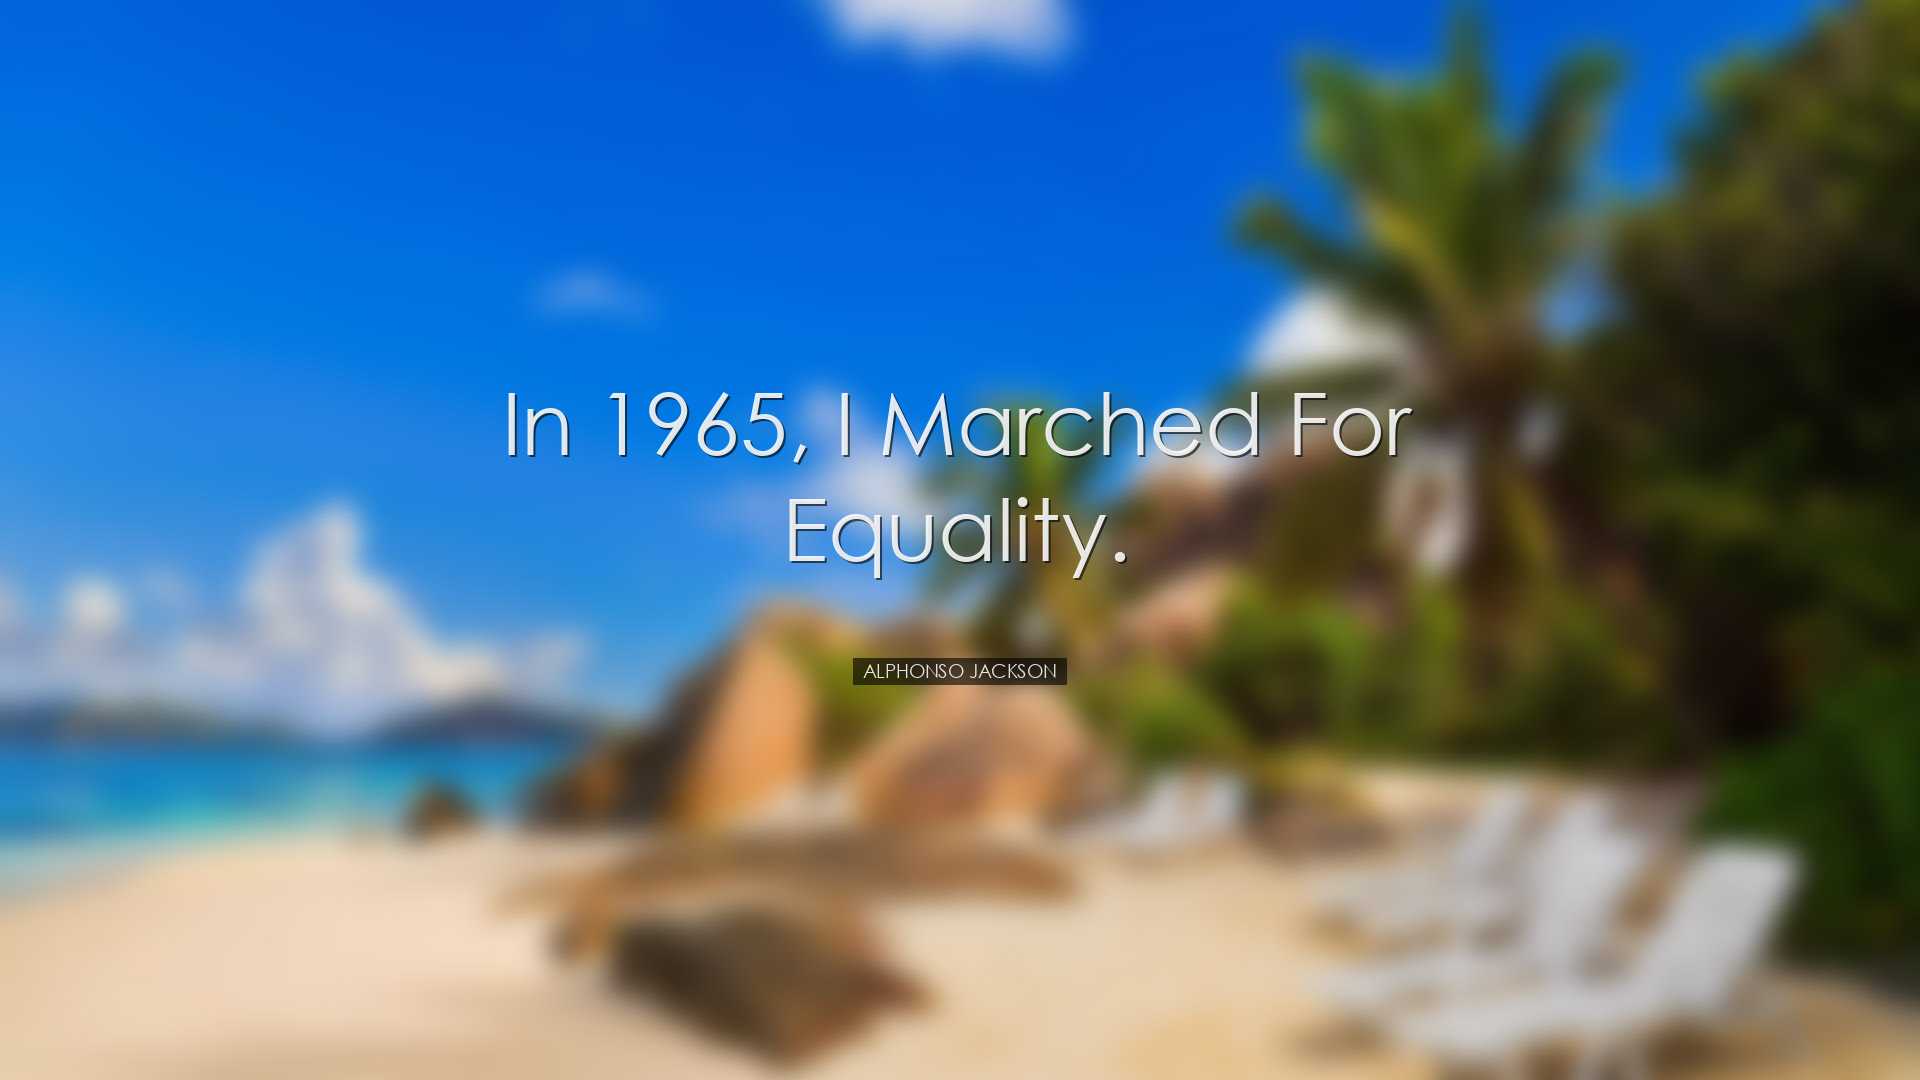 In 1965, I marched for equality. - Alphonso Jackson